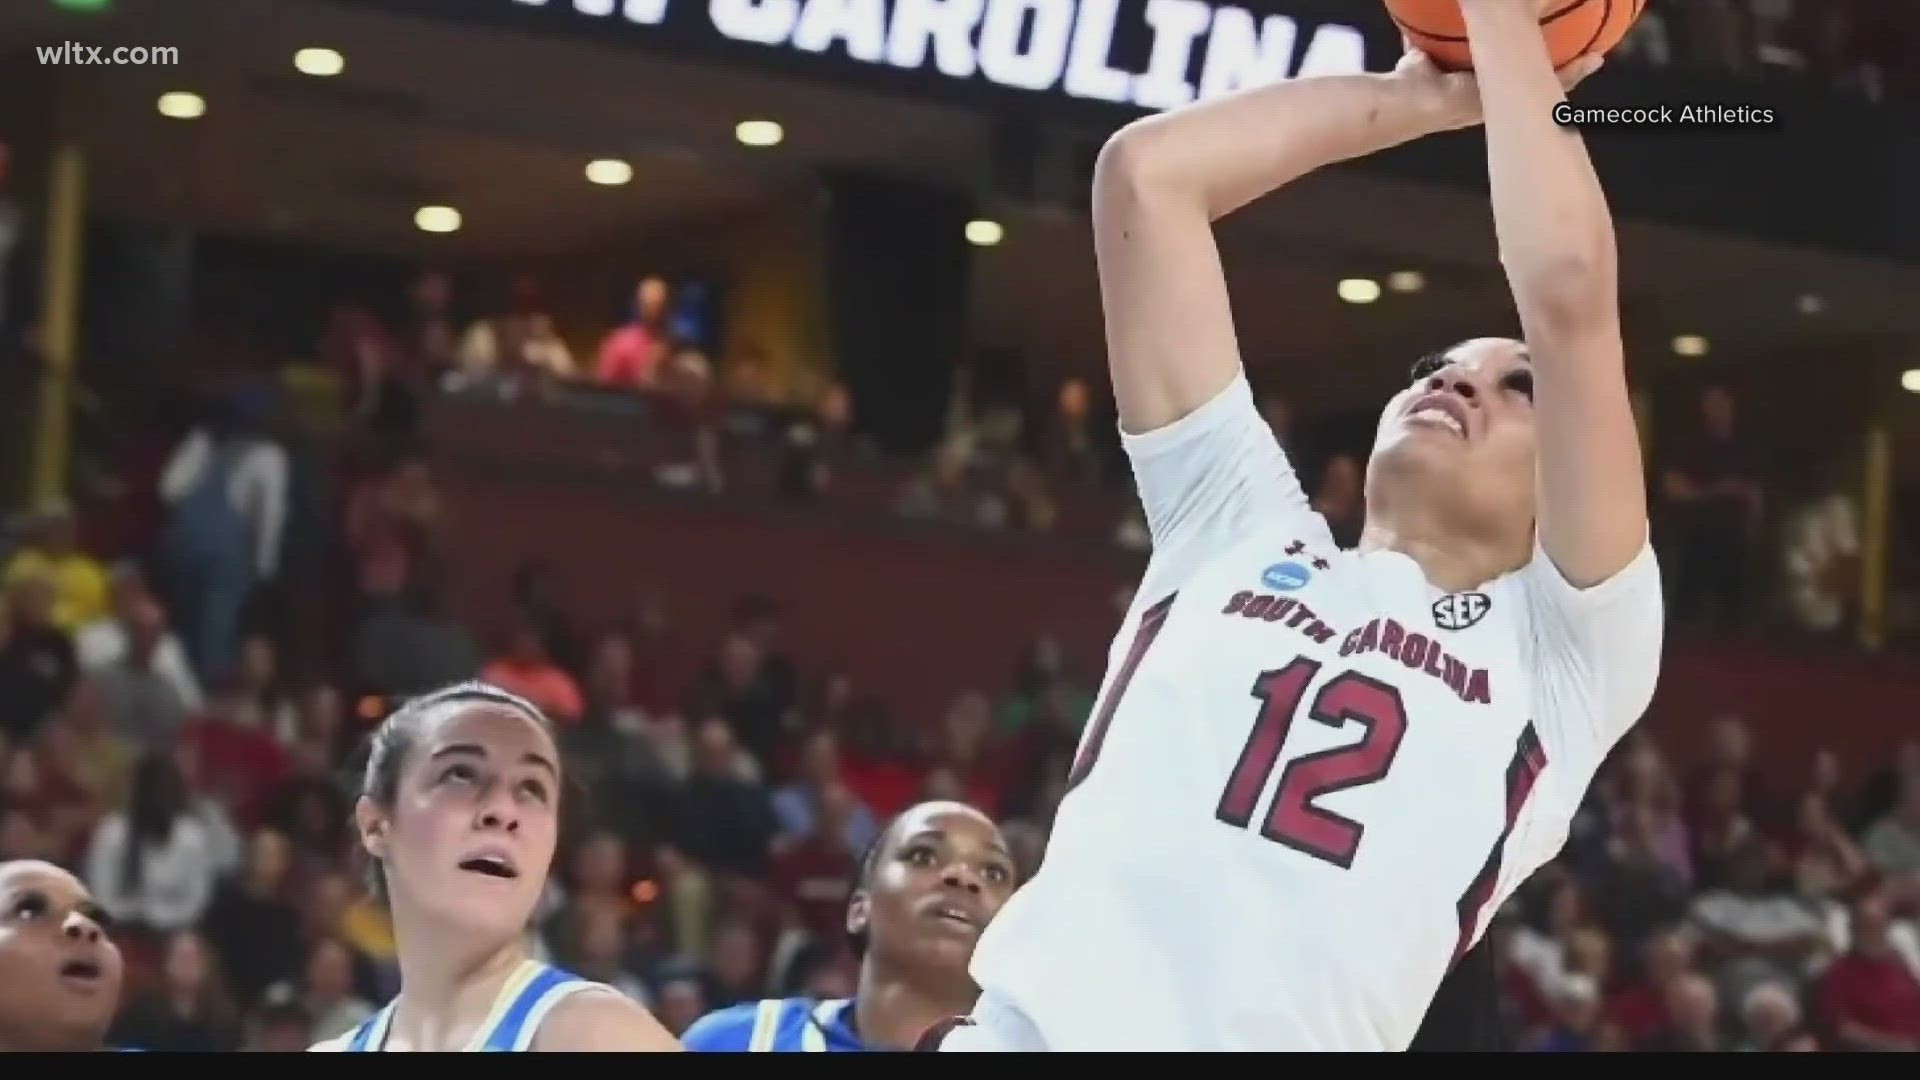 The South Carolina Gamecocks are getting ready to face Maryland in the Elite Eight of the Women's March Madness.